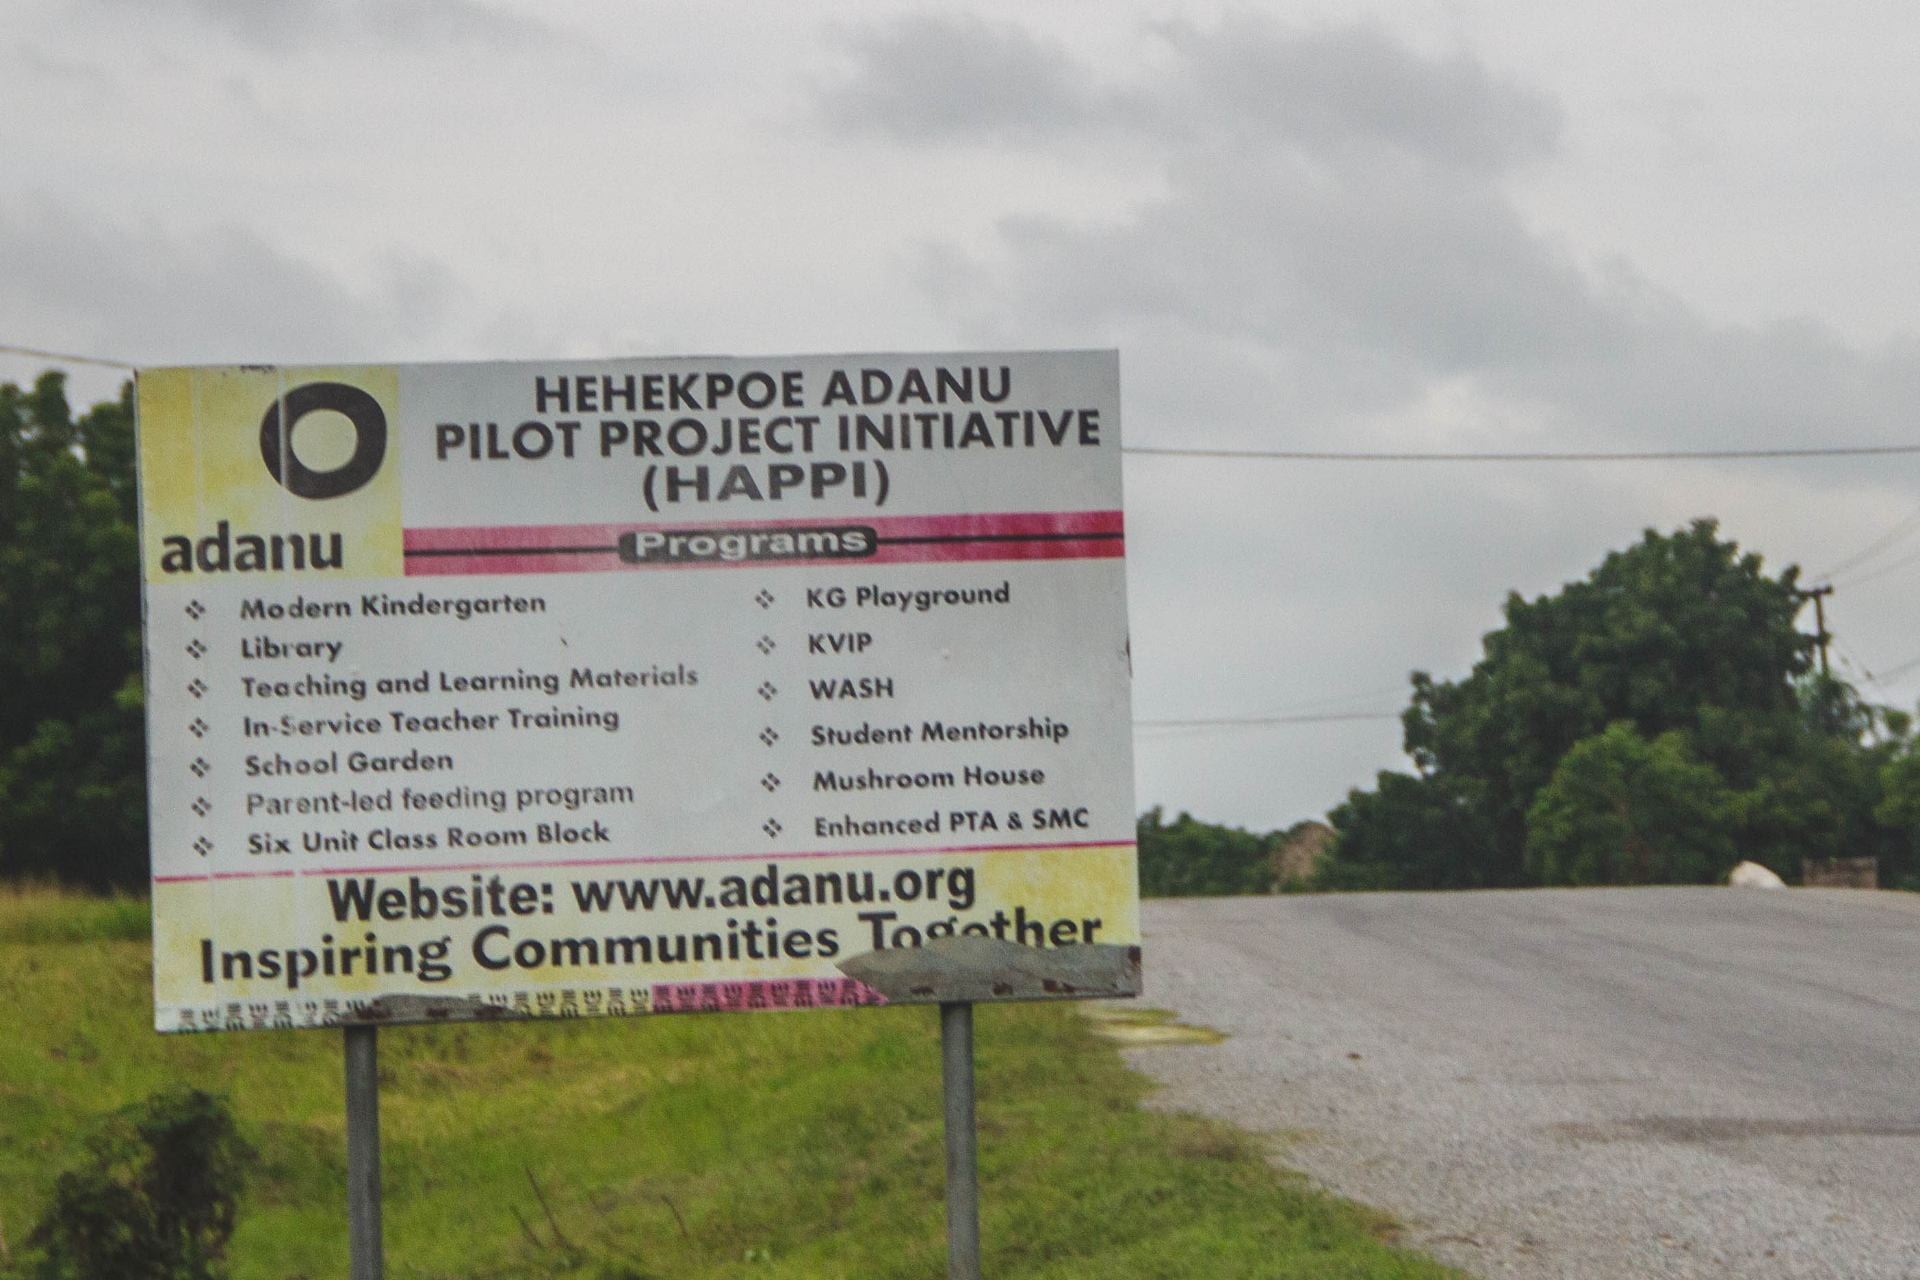 The sign outside of the village we visited. It lists the various projects the village is partnering with Adanu on. 